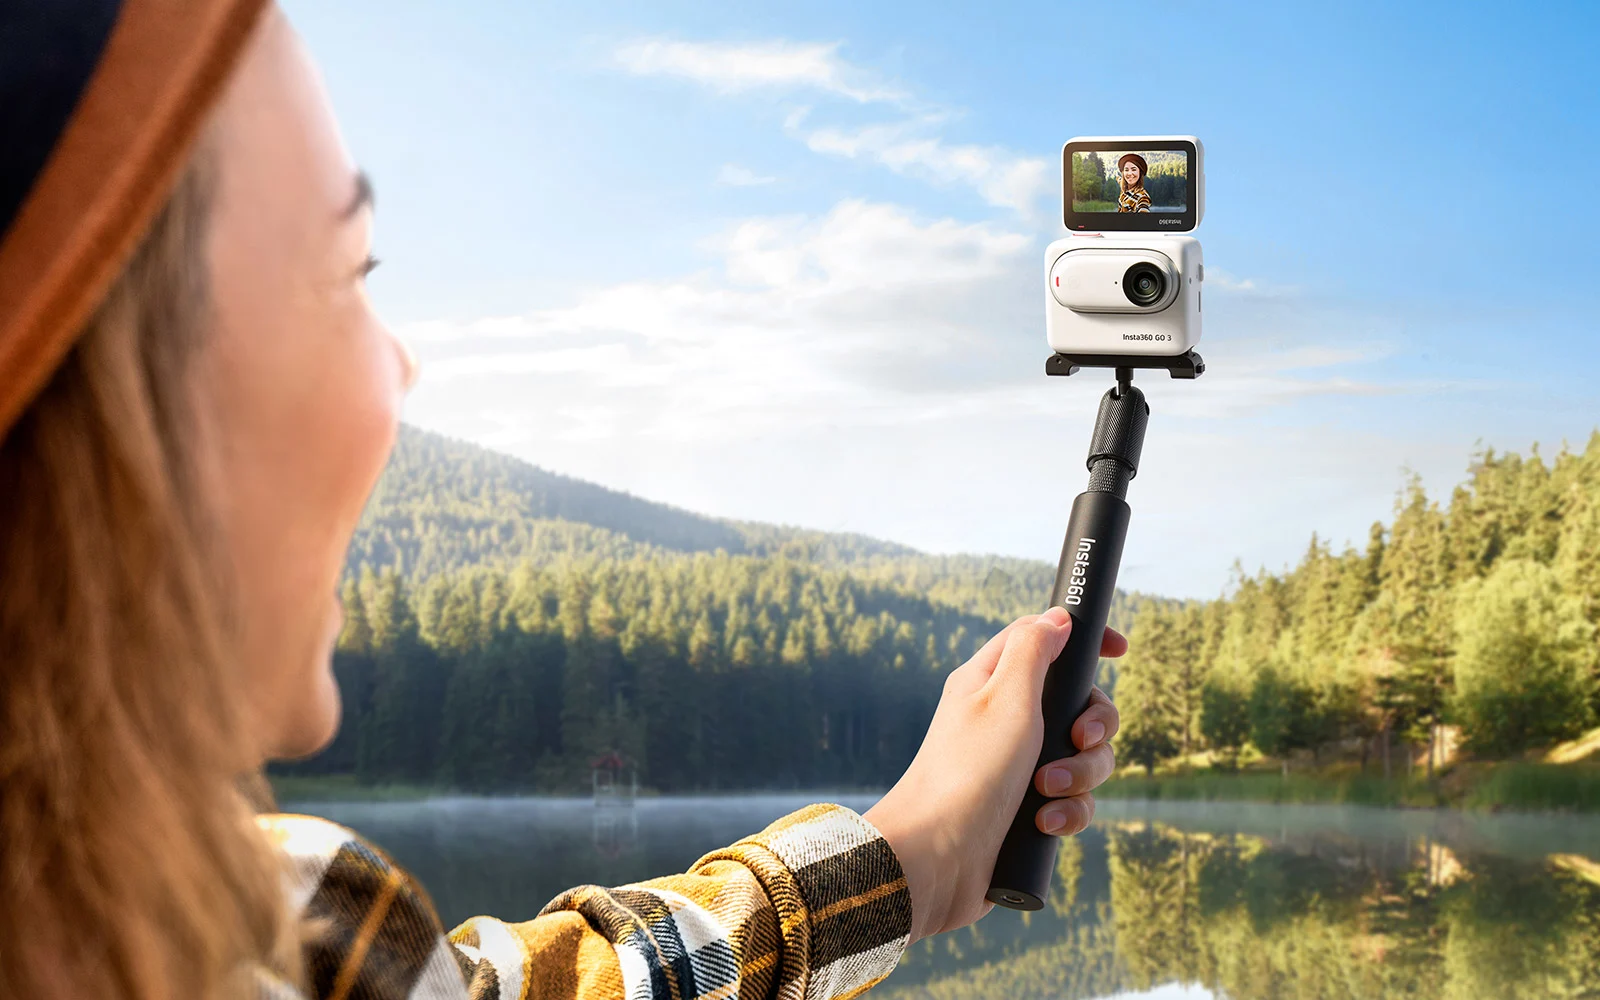 The full Insta360 Go 3 assembly mounted on a selfie stick.